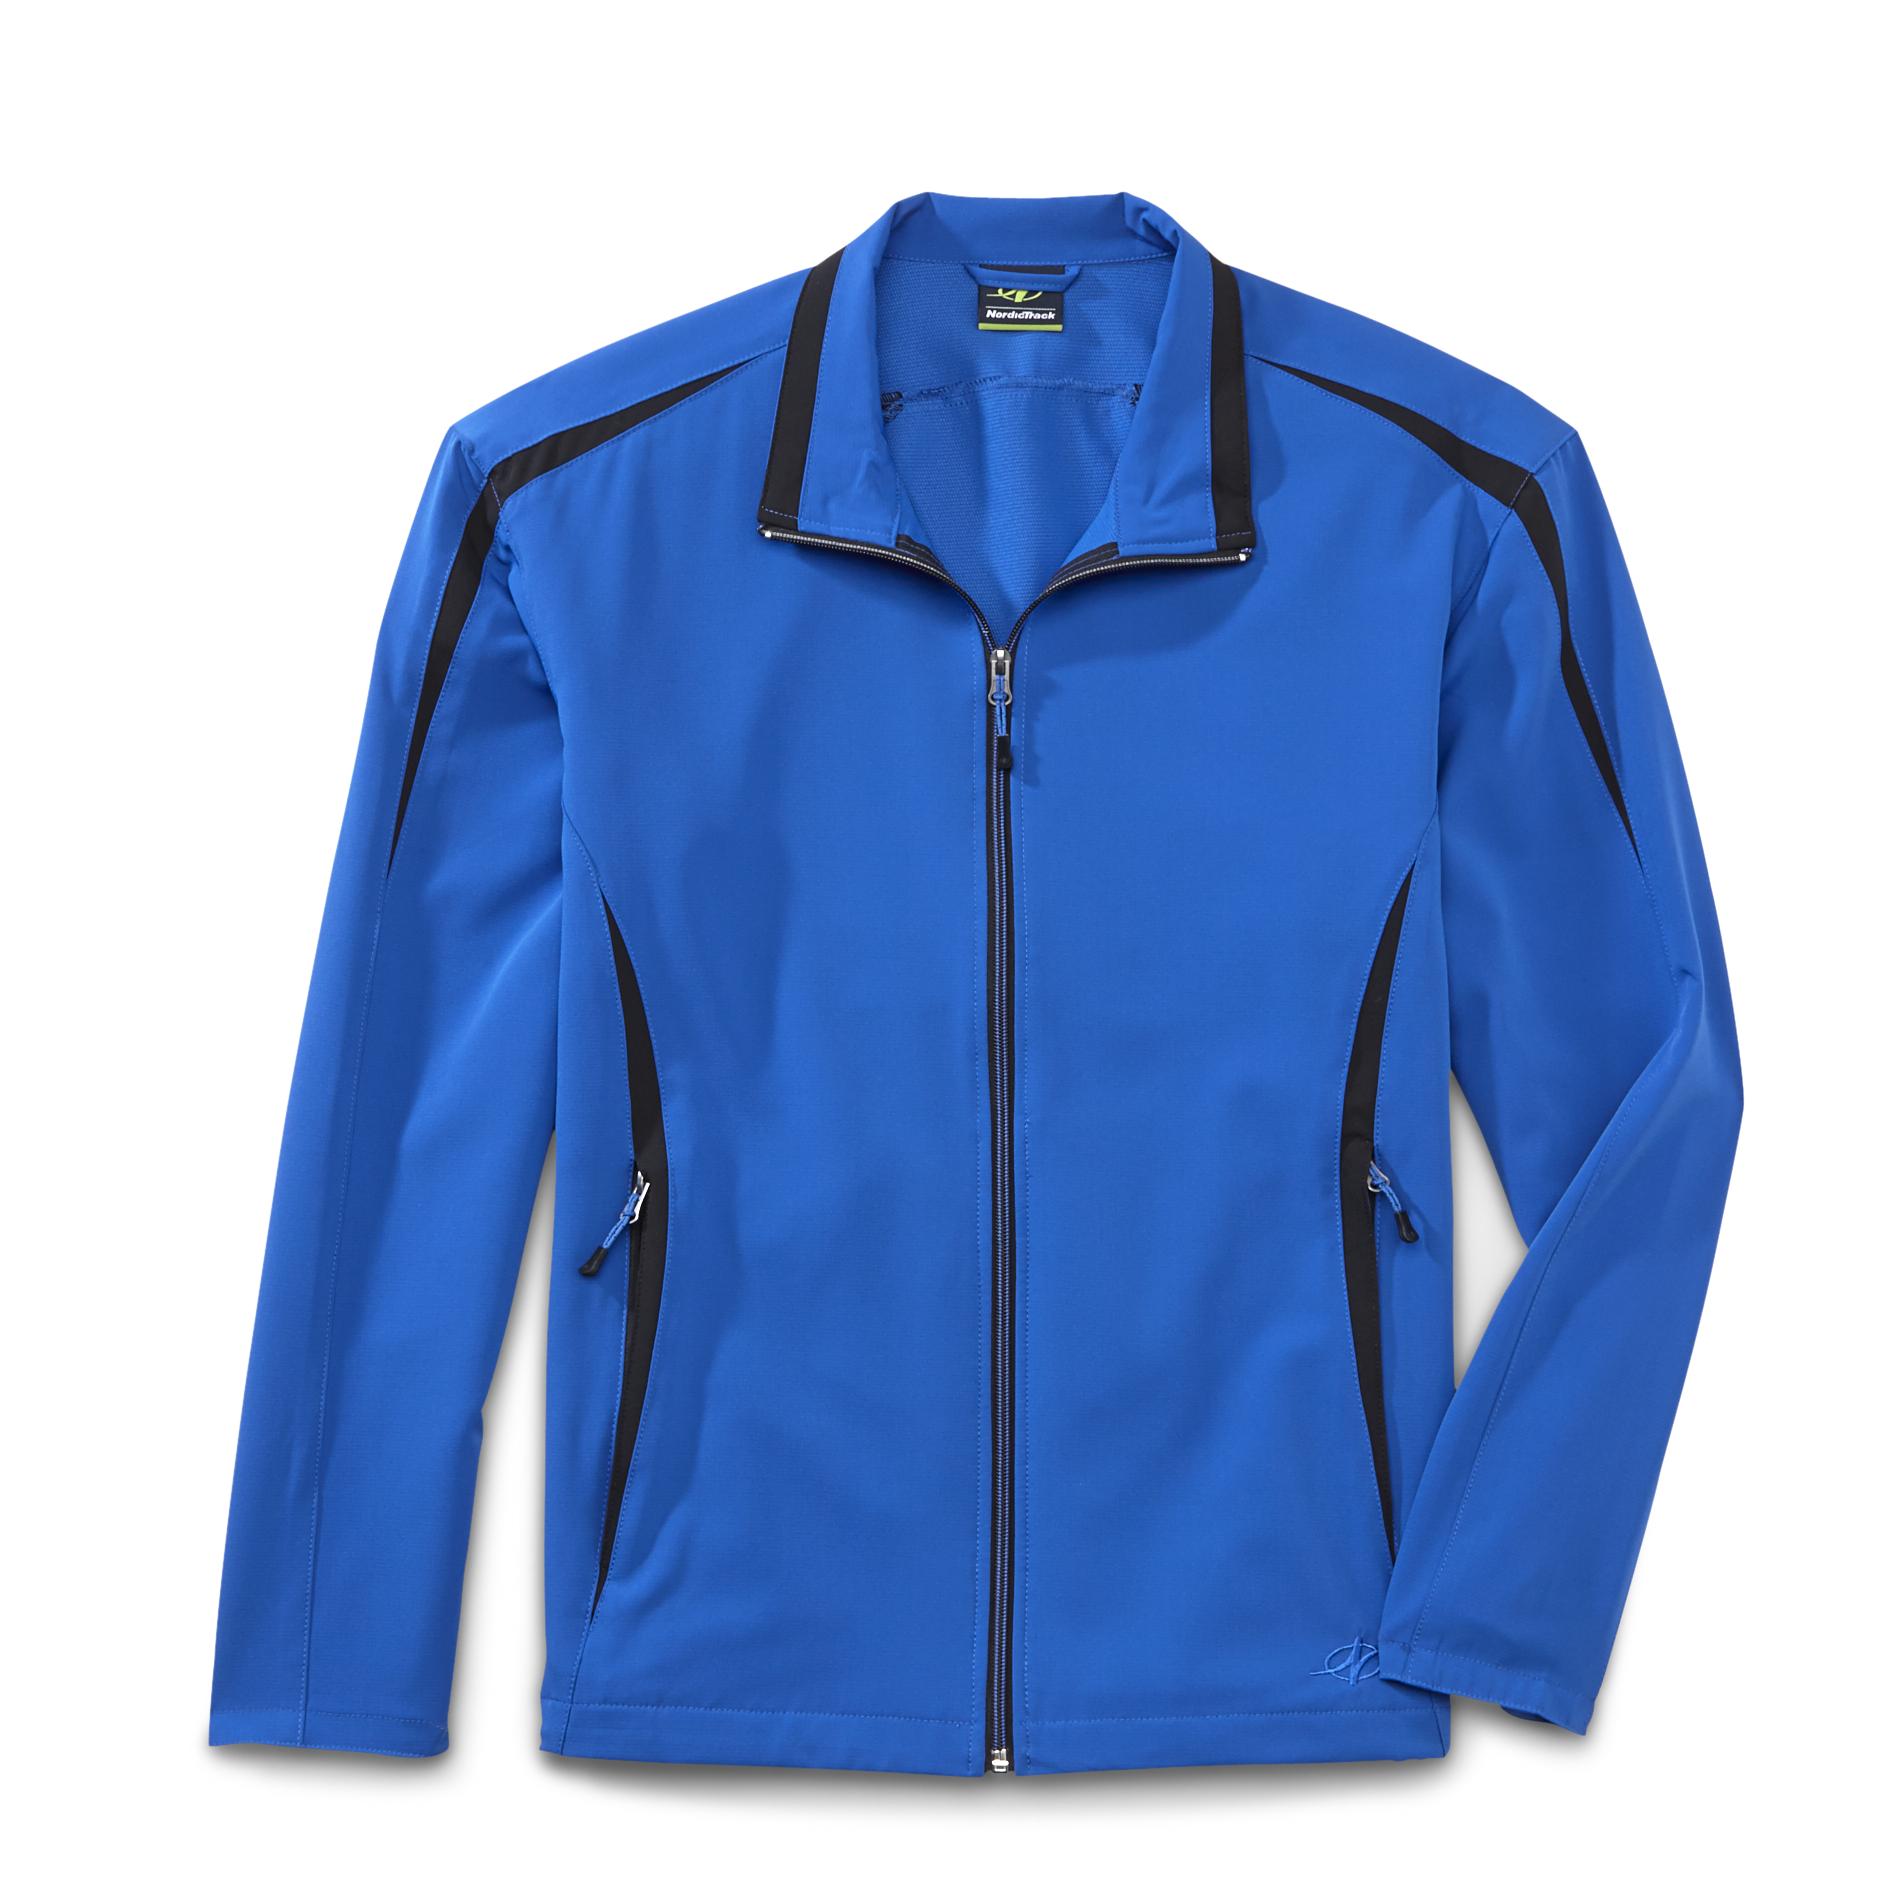 NordicTrack Men's All-Motion Lightweight Performance Jacket - Two-Tone